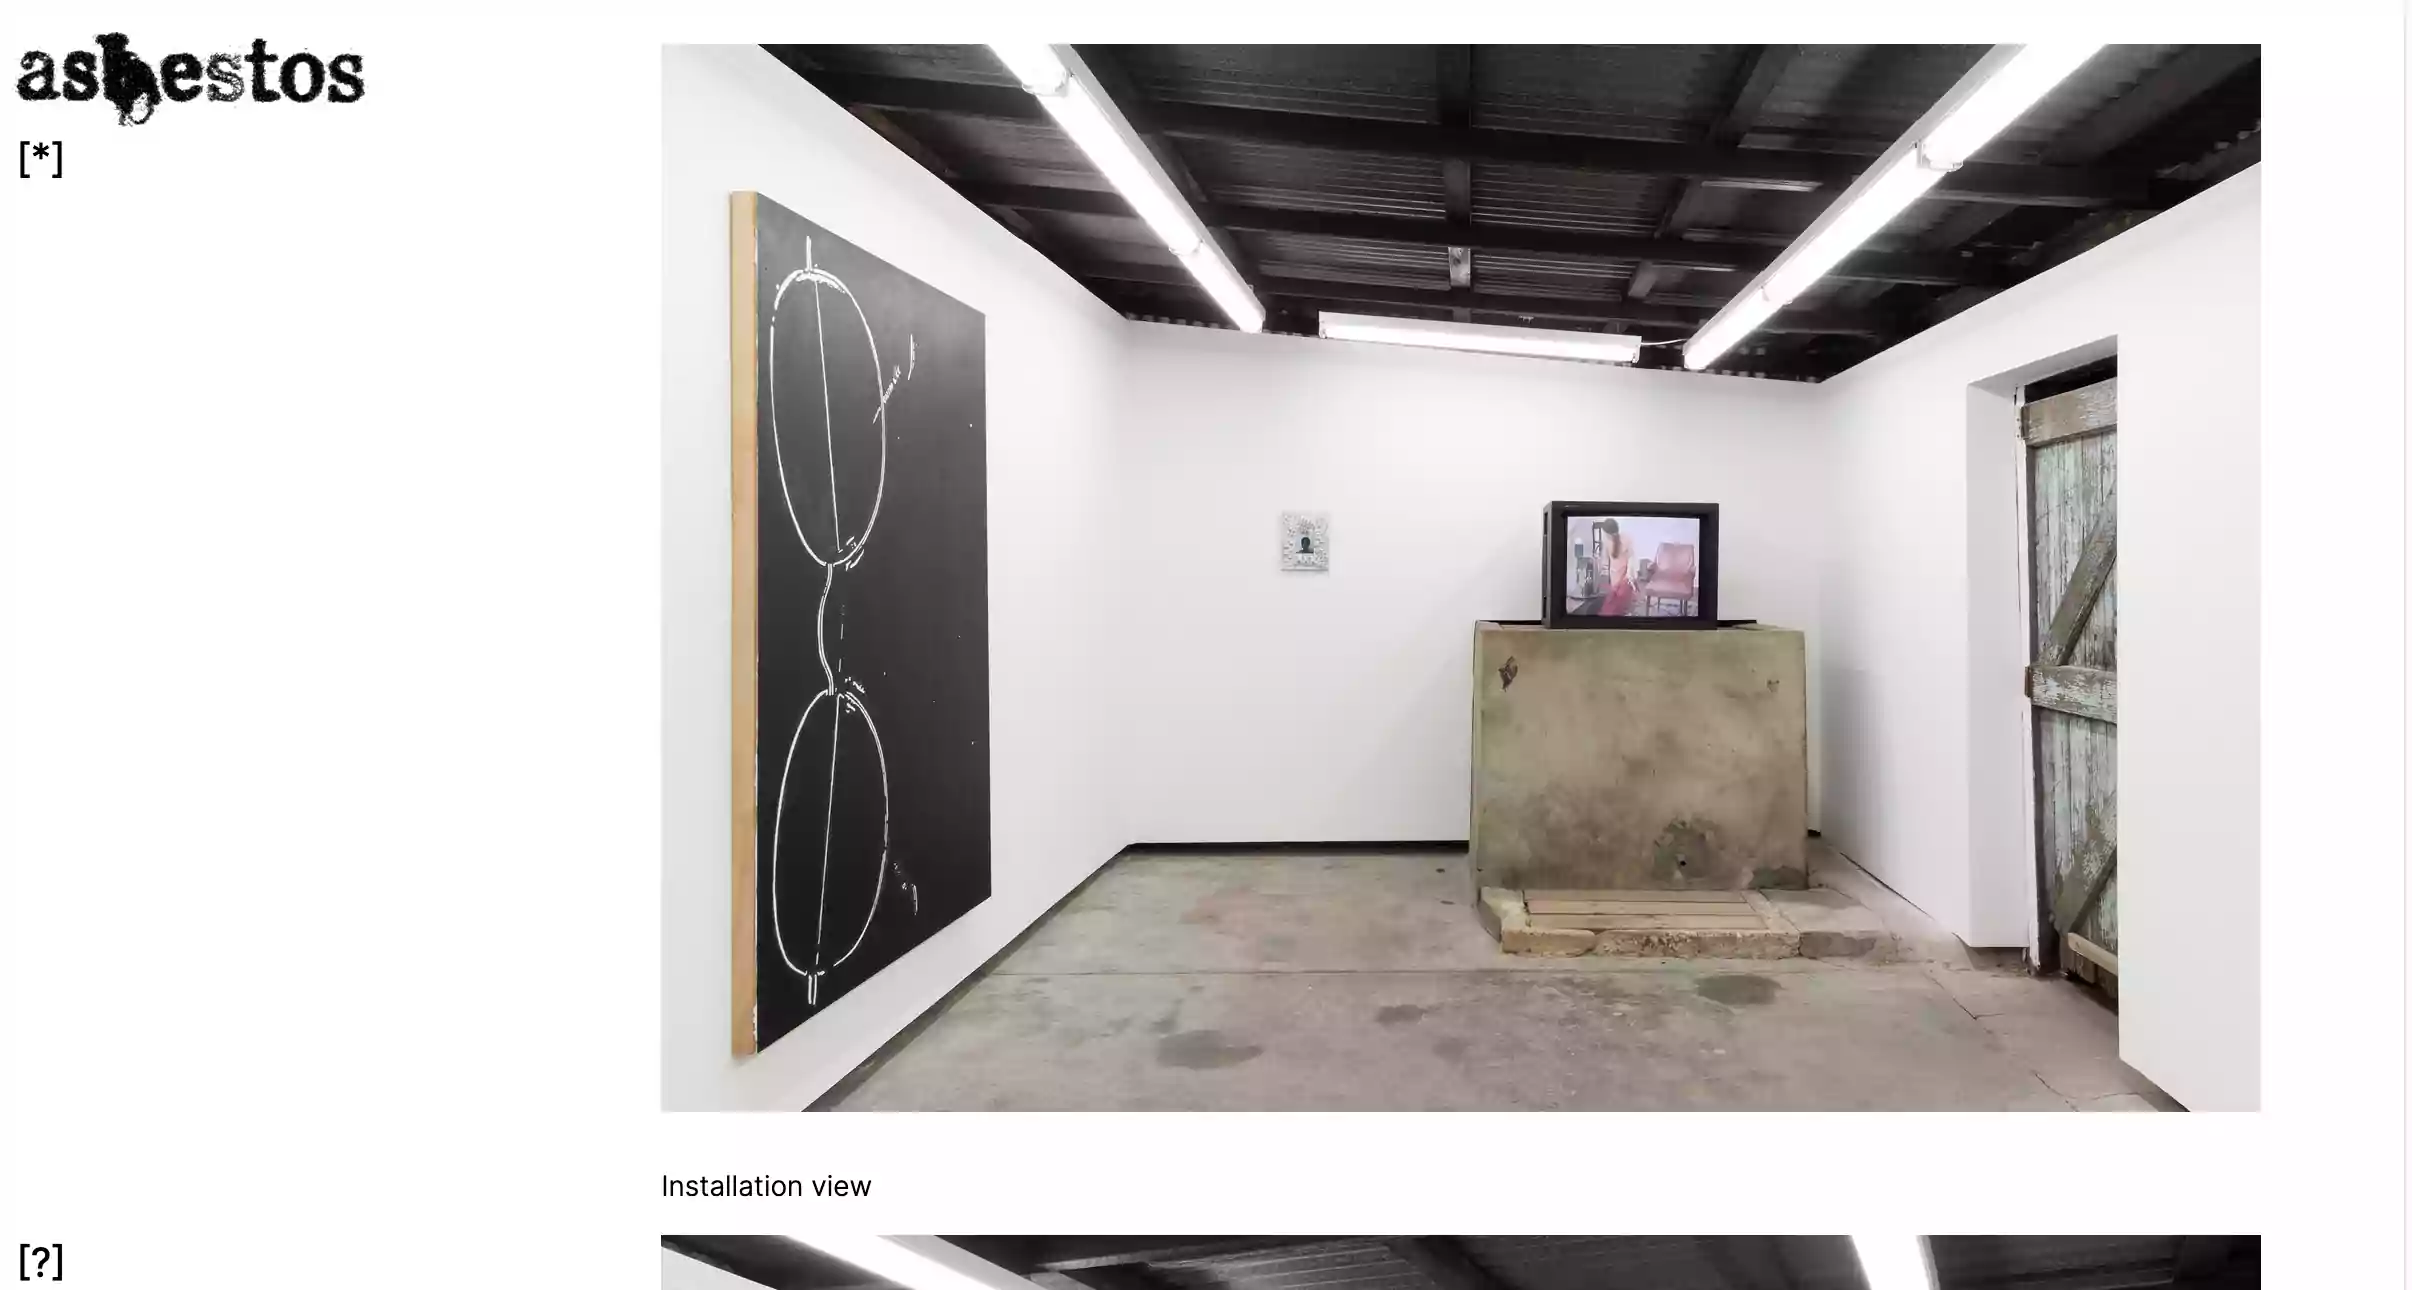 A screen capture of the Asbestos website showing the white walls, odd concrete plinth, distressed wooden door of the gallery. Currently hung is a large painting showing a pair of glasses and a television mid broadcast capturing a woman next to a leather chair.